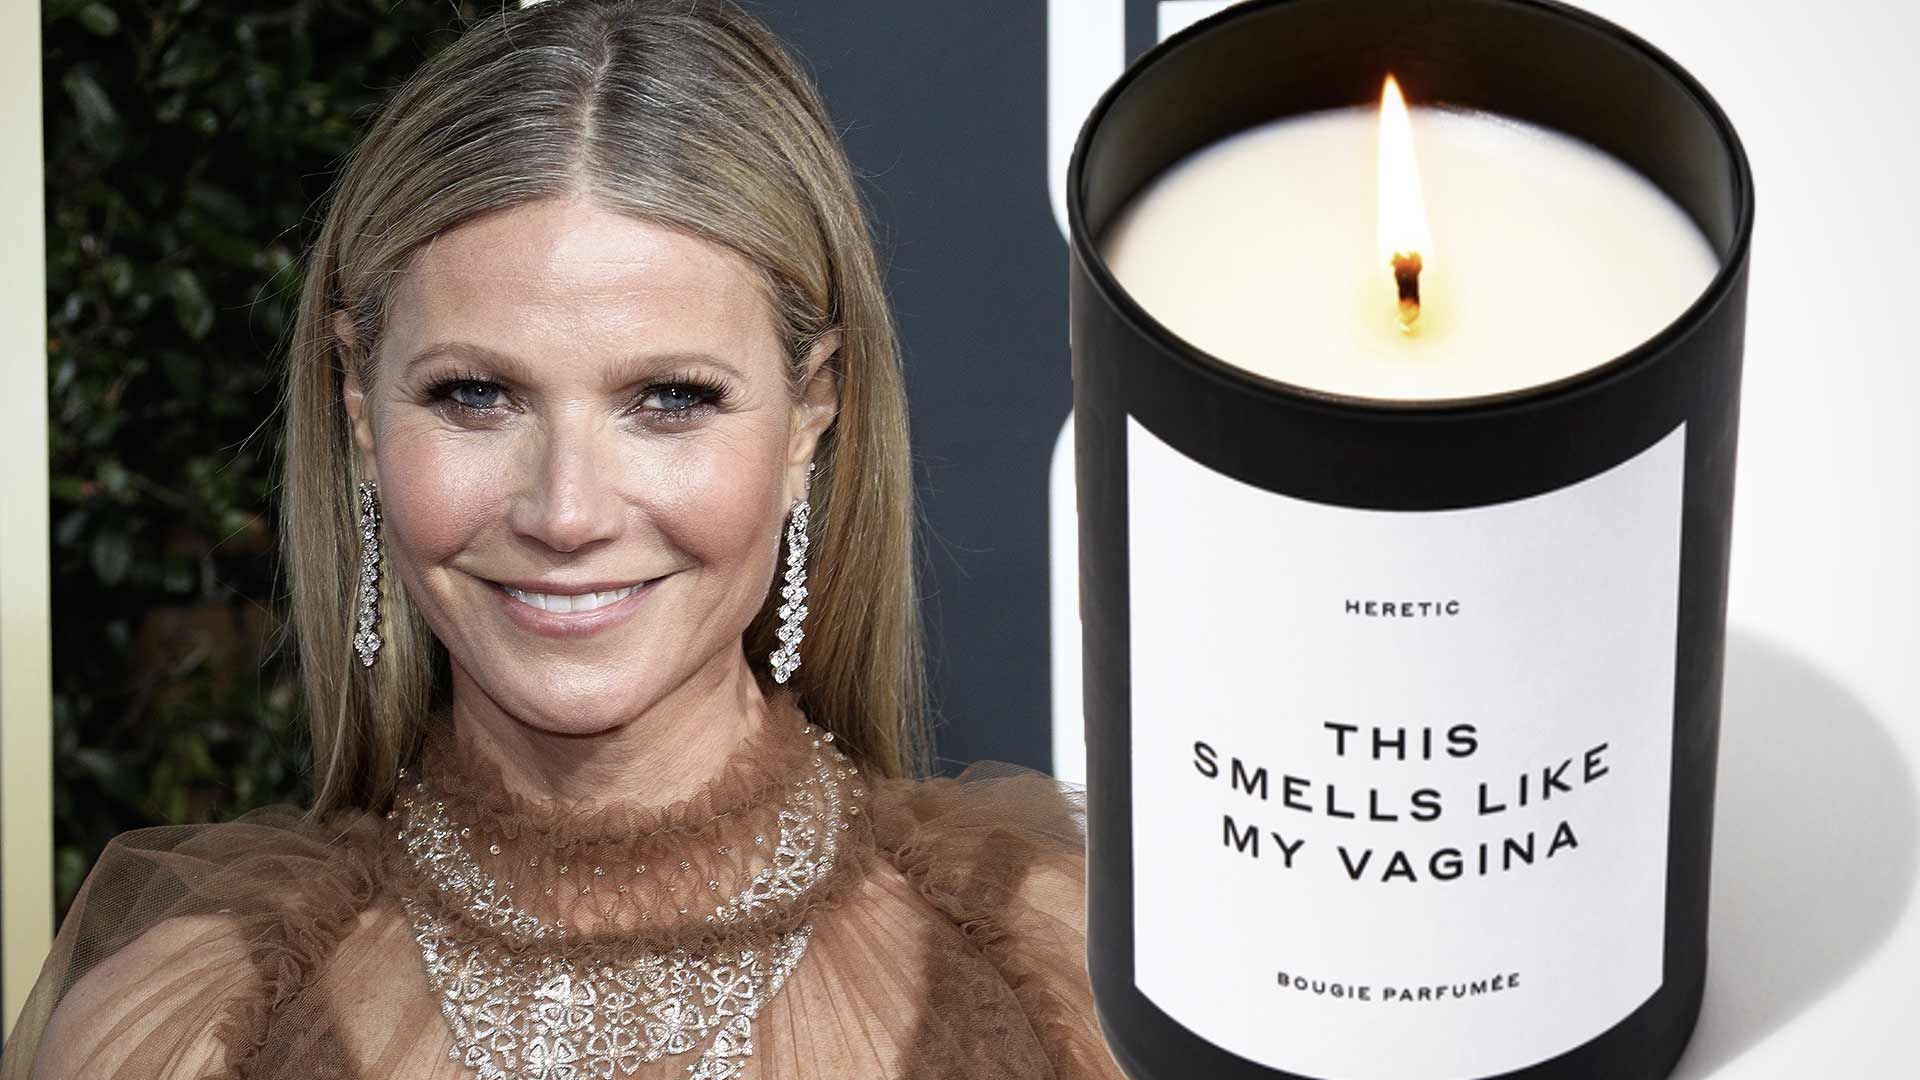 Gwyneth Paltrows Selling A Candle That Smells Like My Vagina On Goop 